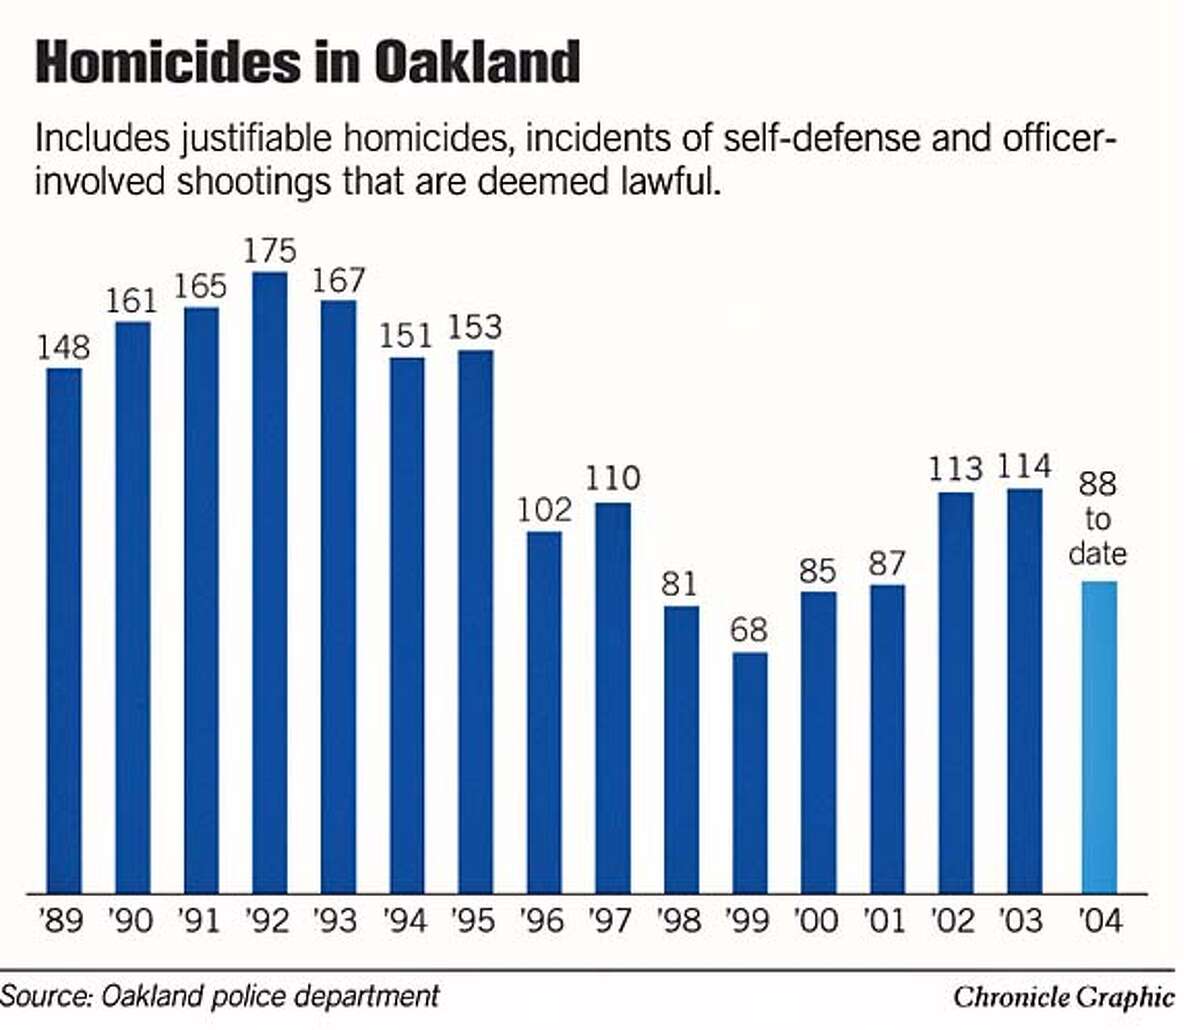 OAKLAND / Homicide rate plummeting / Down 23 to date, and police